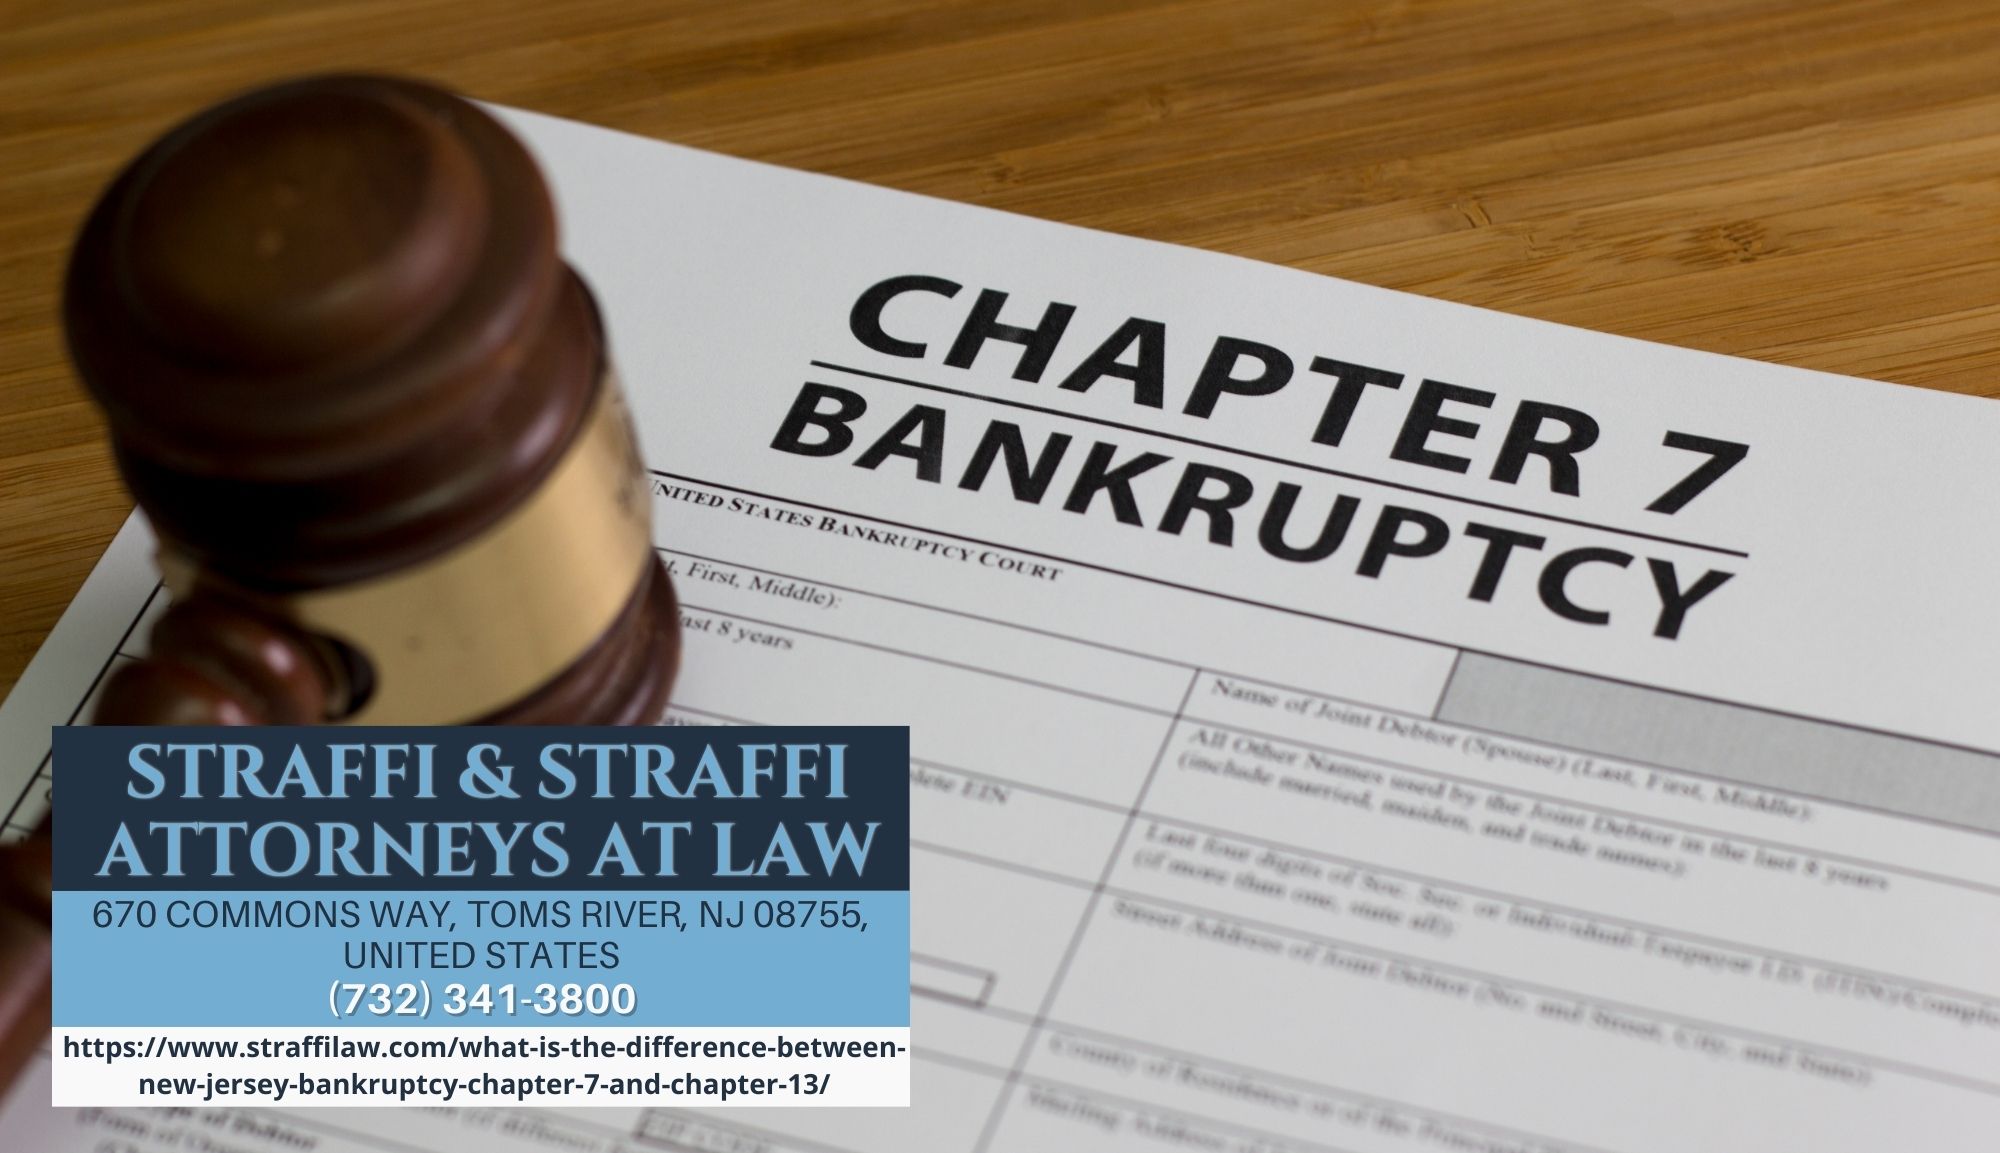 New Jersey Bankruptcy Attorney Daniel Straffi Releases In-depth Article on Chapter 7 and Chapter 13 Bankruptcy